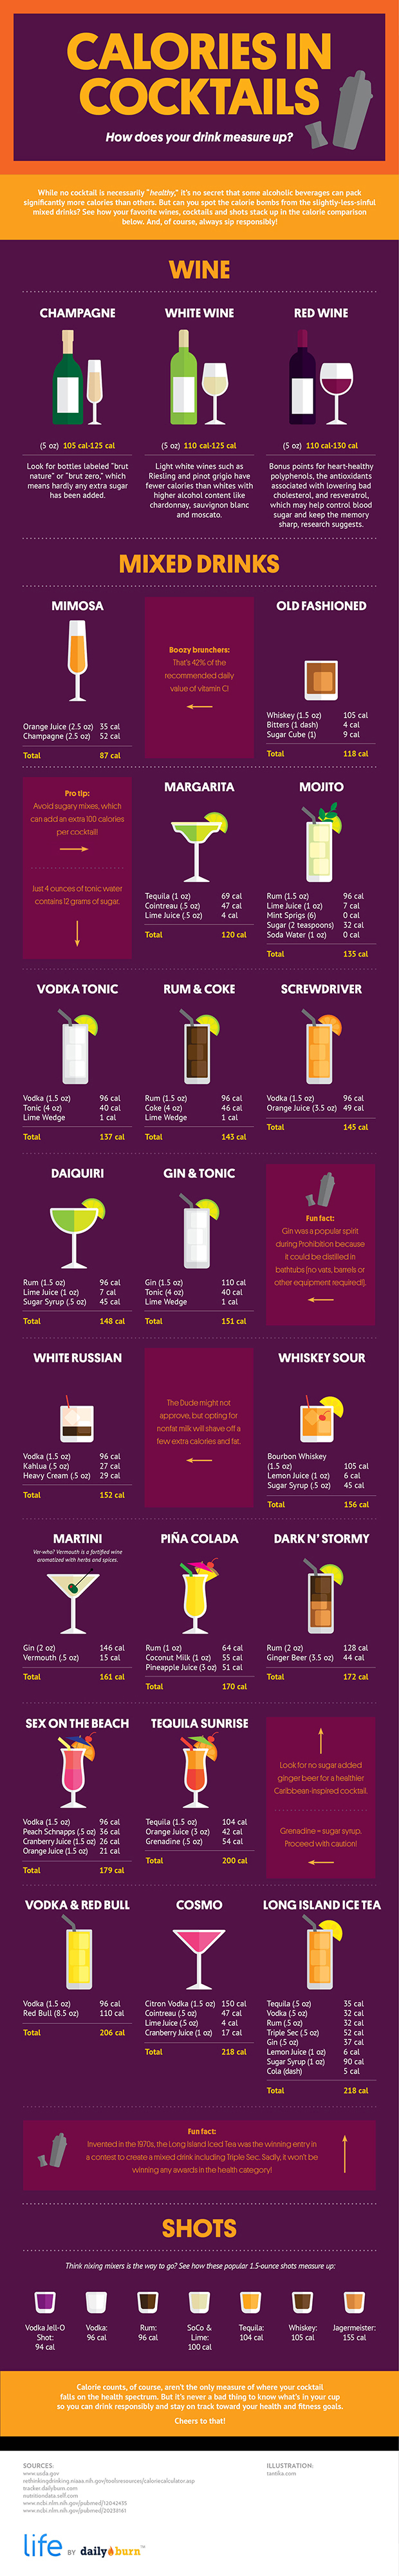 Calories-in-Cocktails-How-Your-Drink-Measures-Up-INFOGRAPHIC1